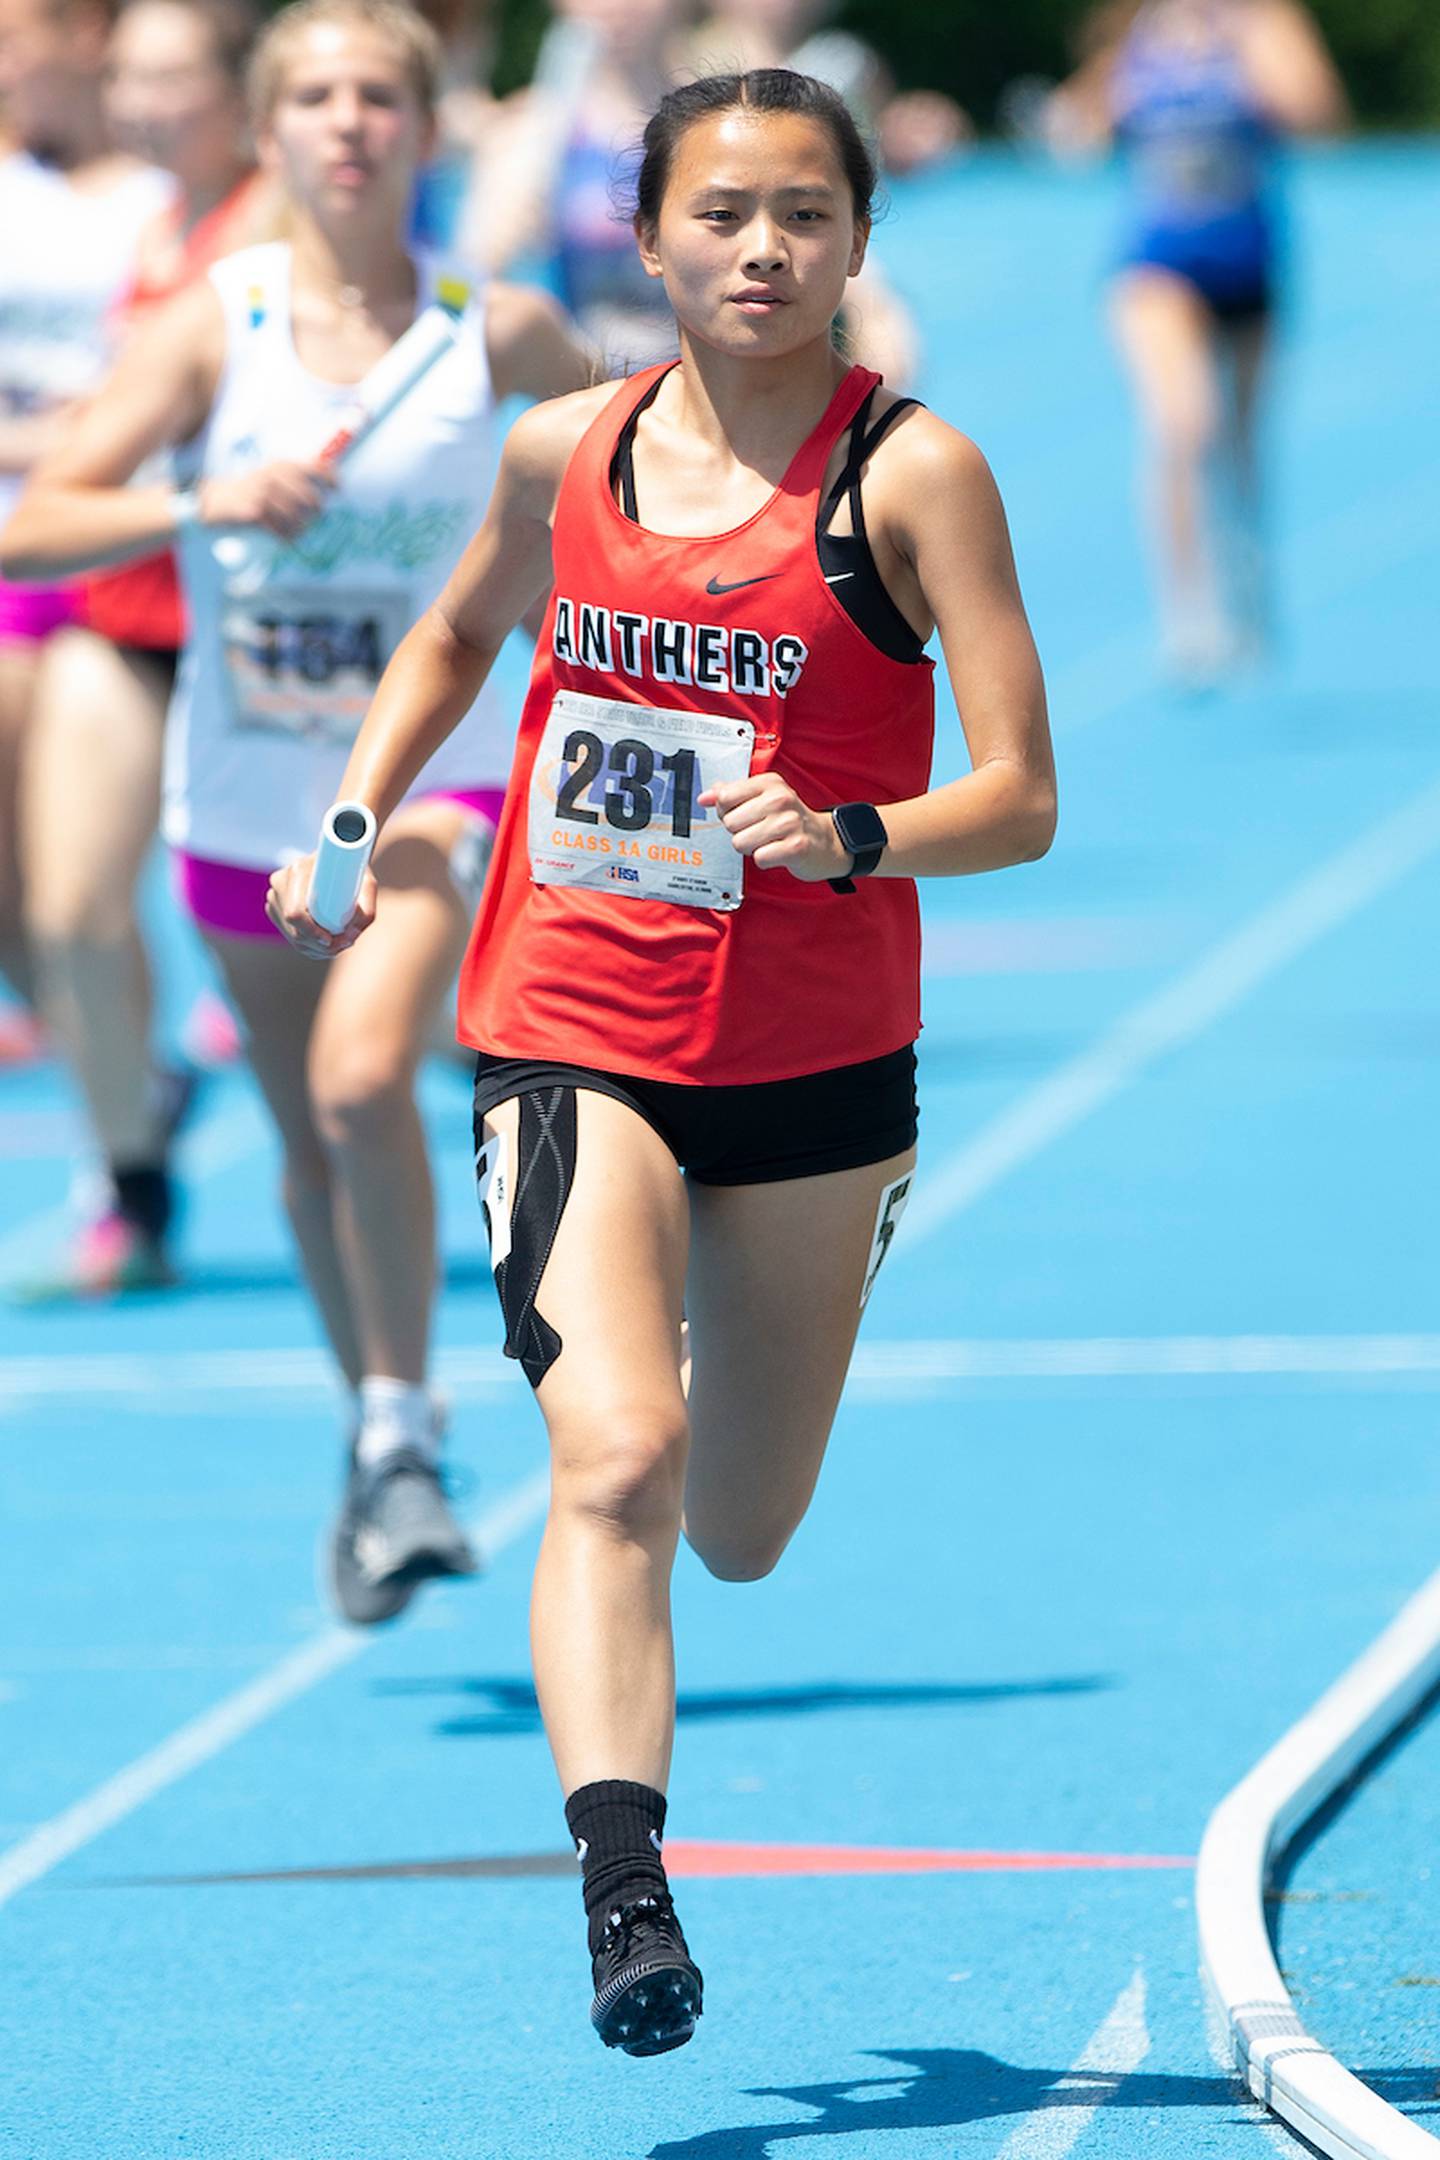 June 10, 2021- Charleston, IL -Erie-Prophetstown's Jade Nickerson competes in the Class 1A 4x800-Meter Relay during IHSA Girls State Track and Field Finals. [Photo: Douglas Cottle/PhotoNews]